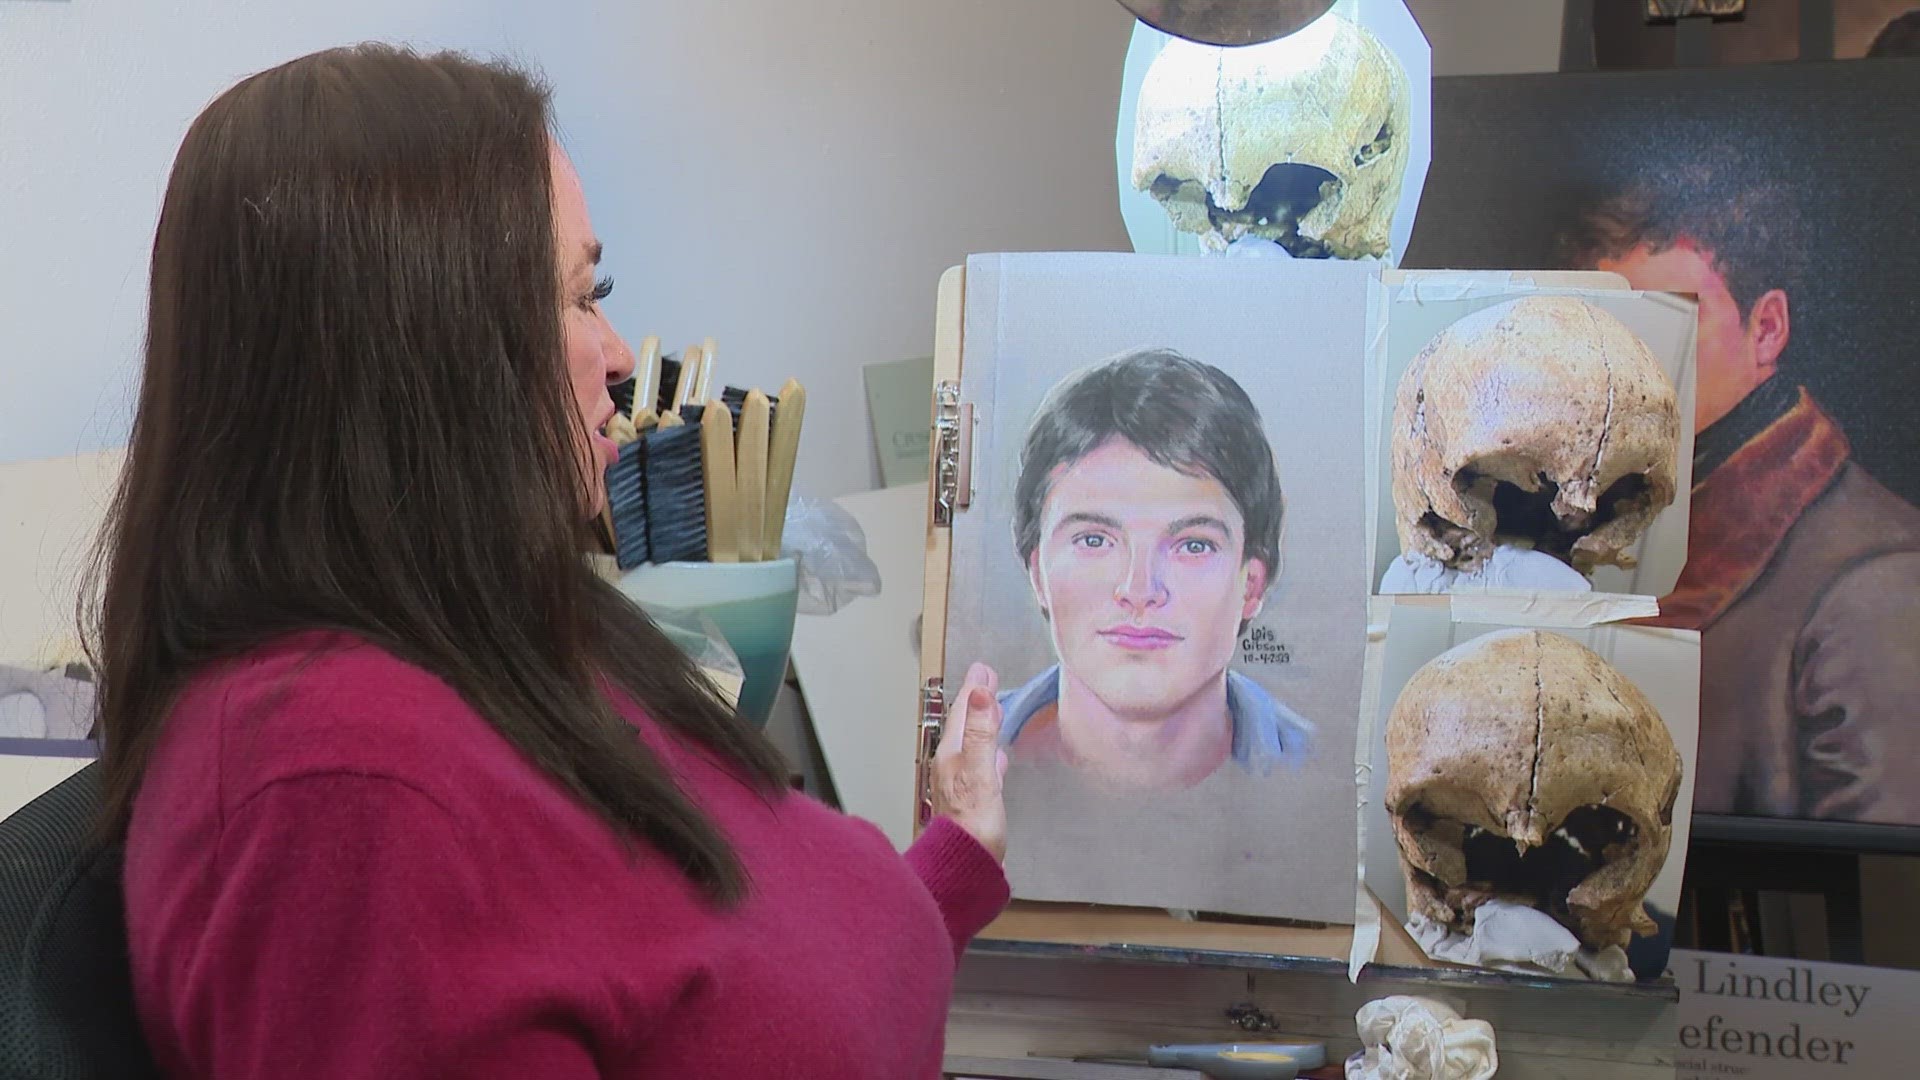 World-renowned forensic sketch artist Lois Gibson trying to help crack a Texas mystery, hoping a new sketch will provide clues about those who fought in the Alamo.